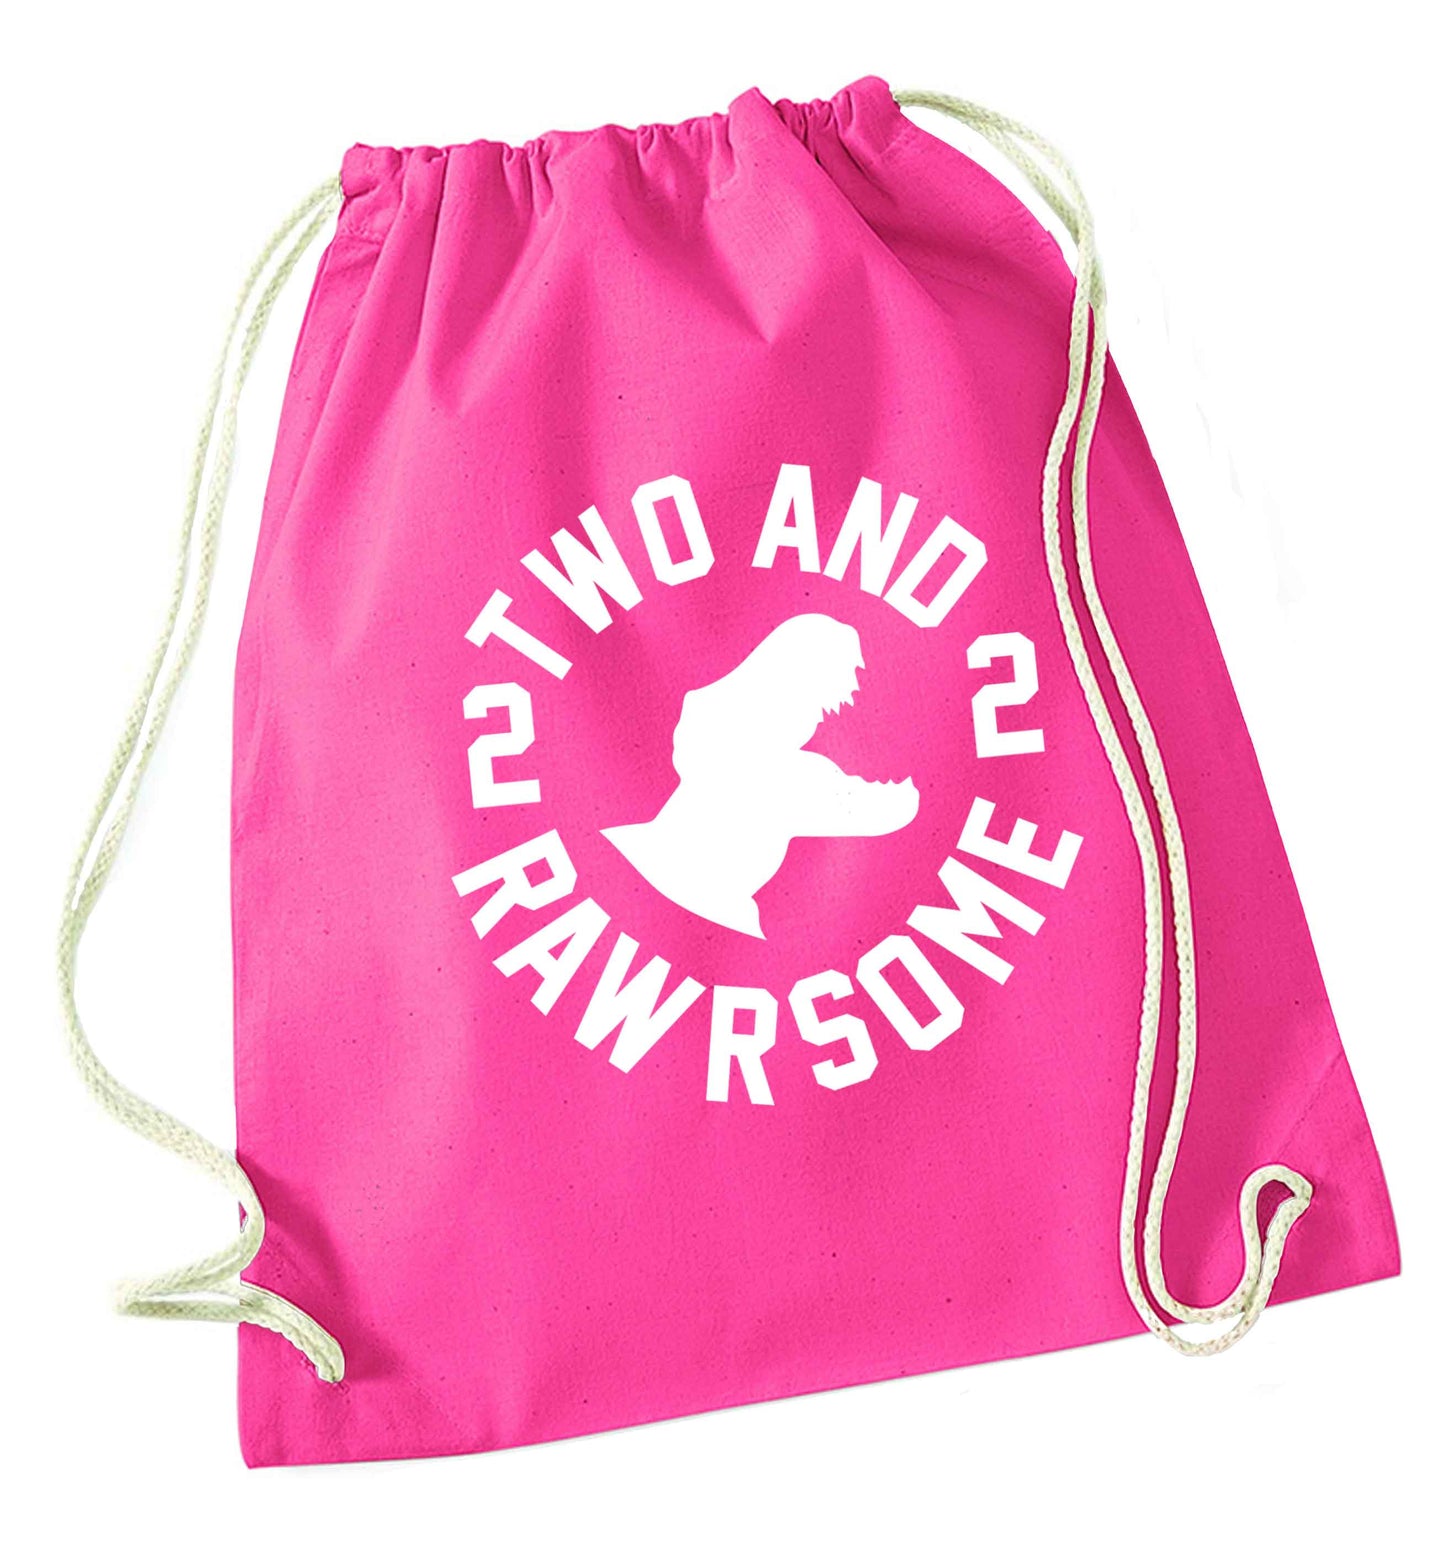 Two and rawrsome pink drawstring bag